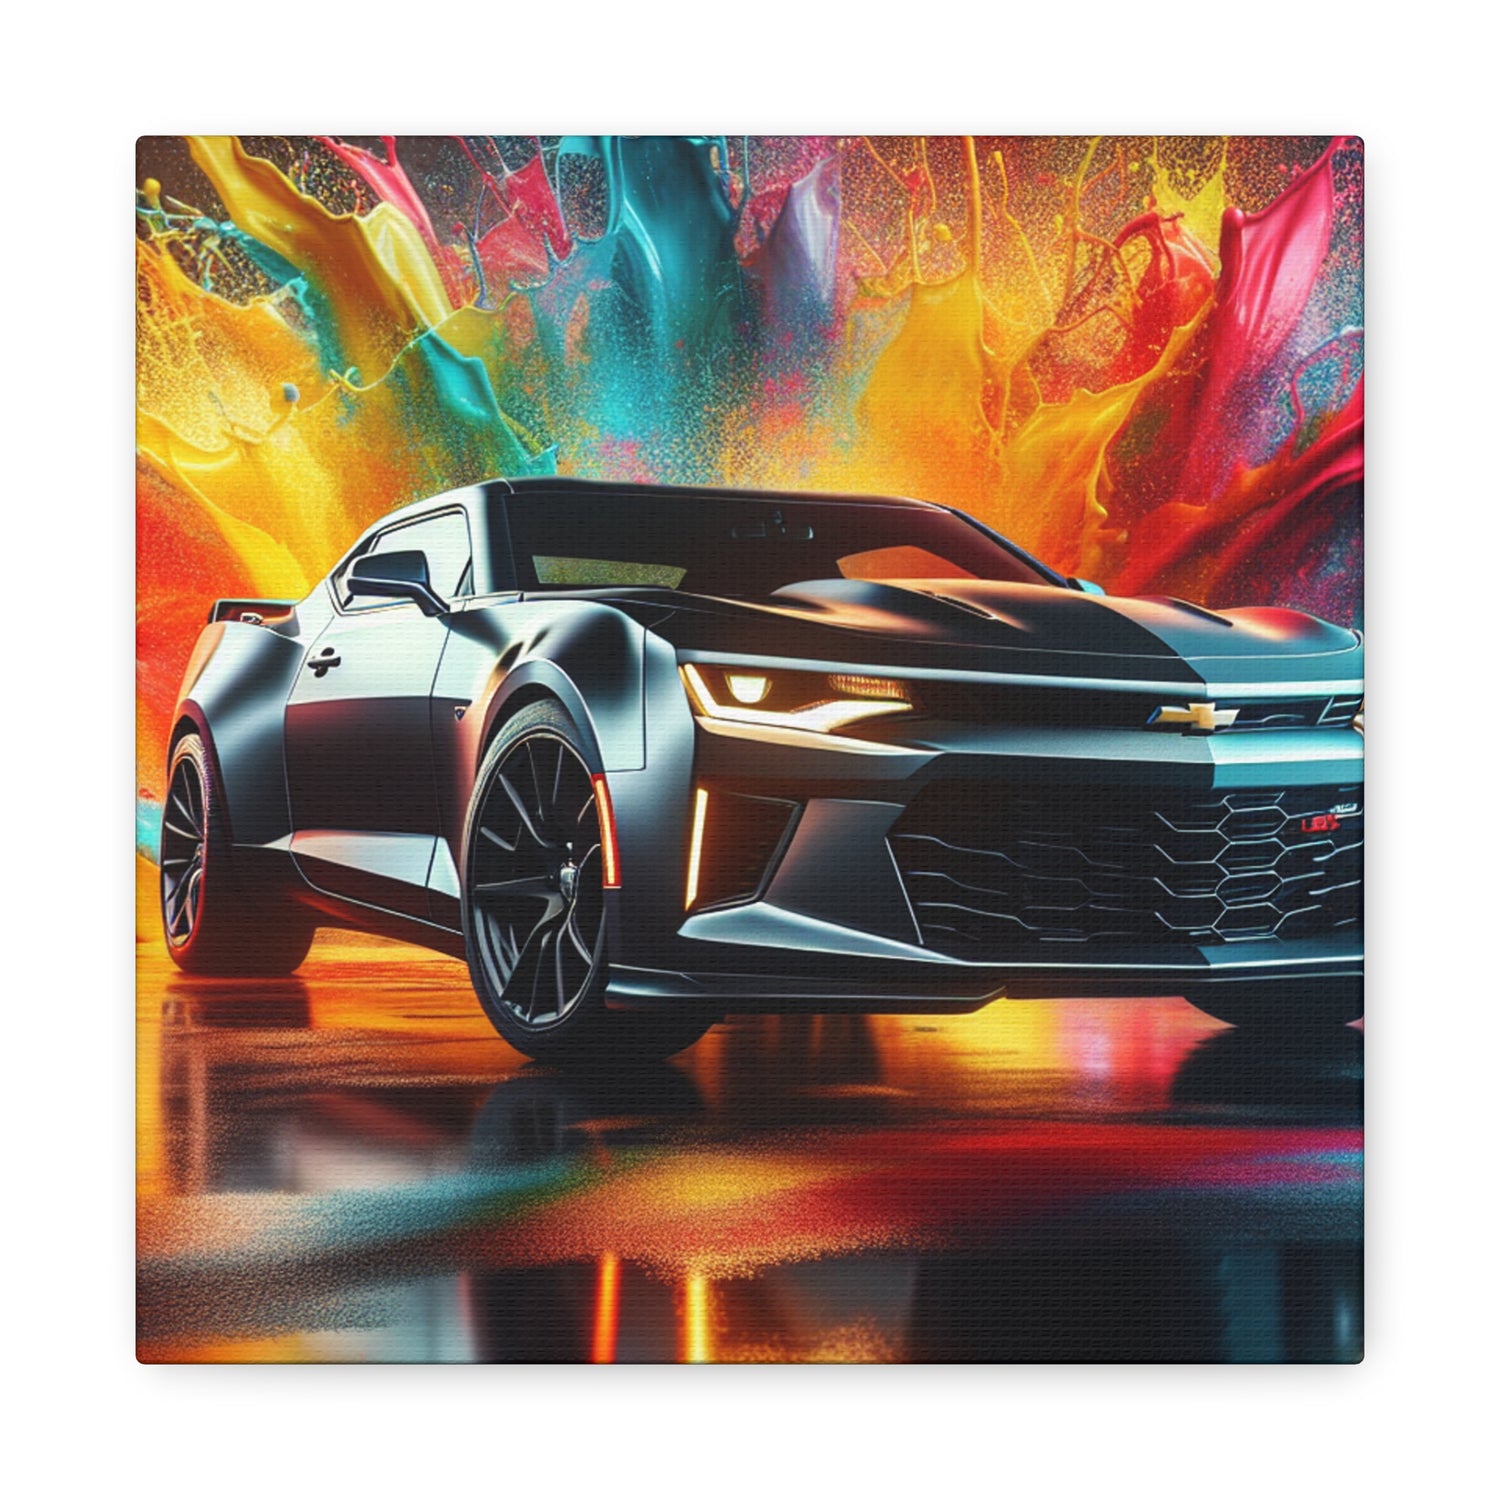 Chevrolet Camaro Wall Art – Premium Quality Canva Print – Handmade Home and Office Decor – Unique Gift for Car Enthusiasts